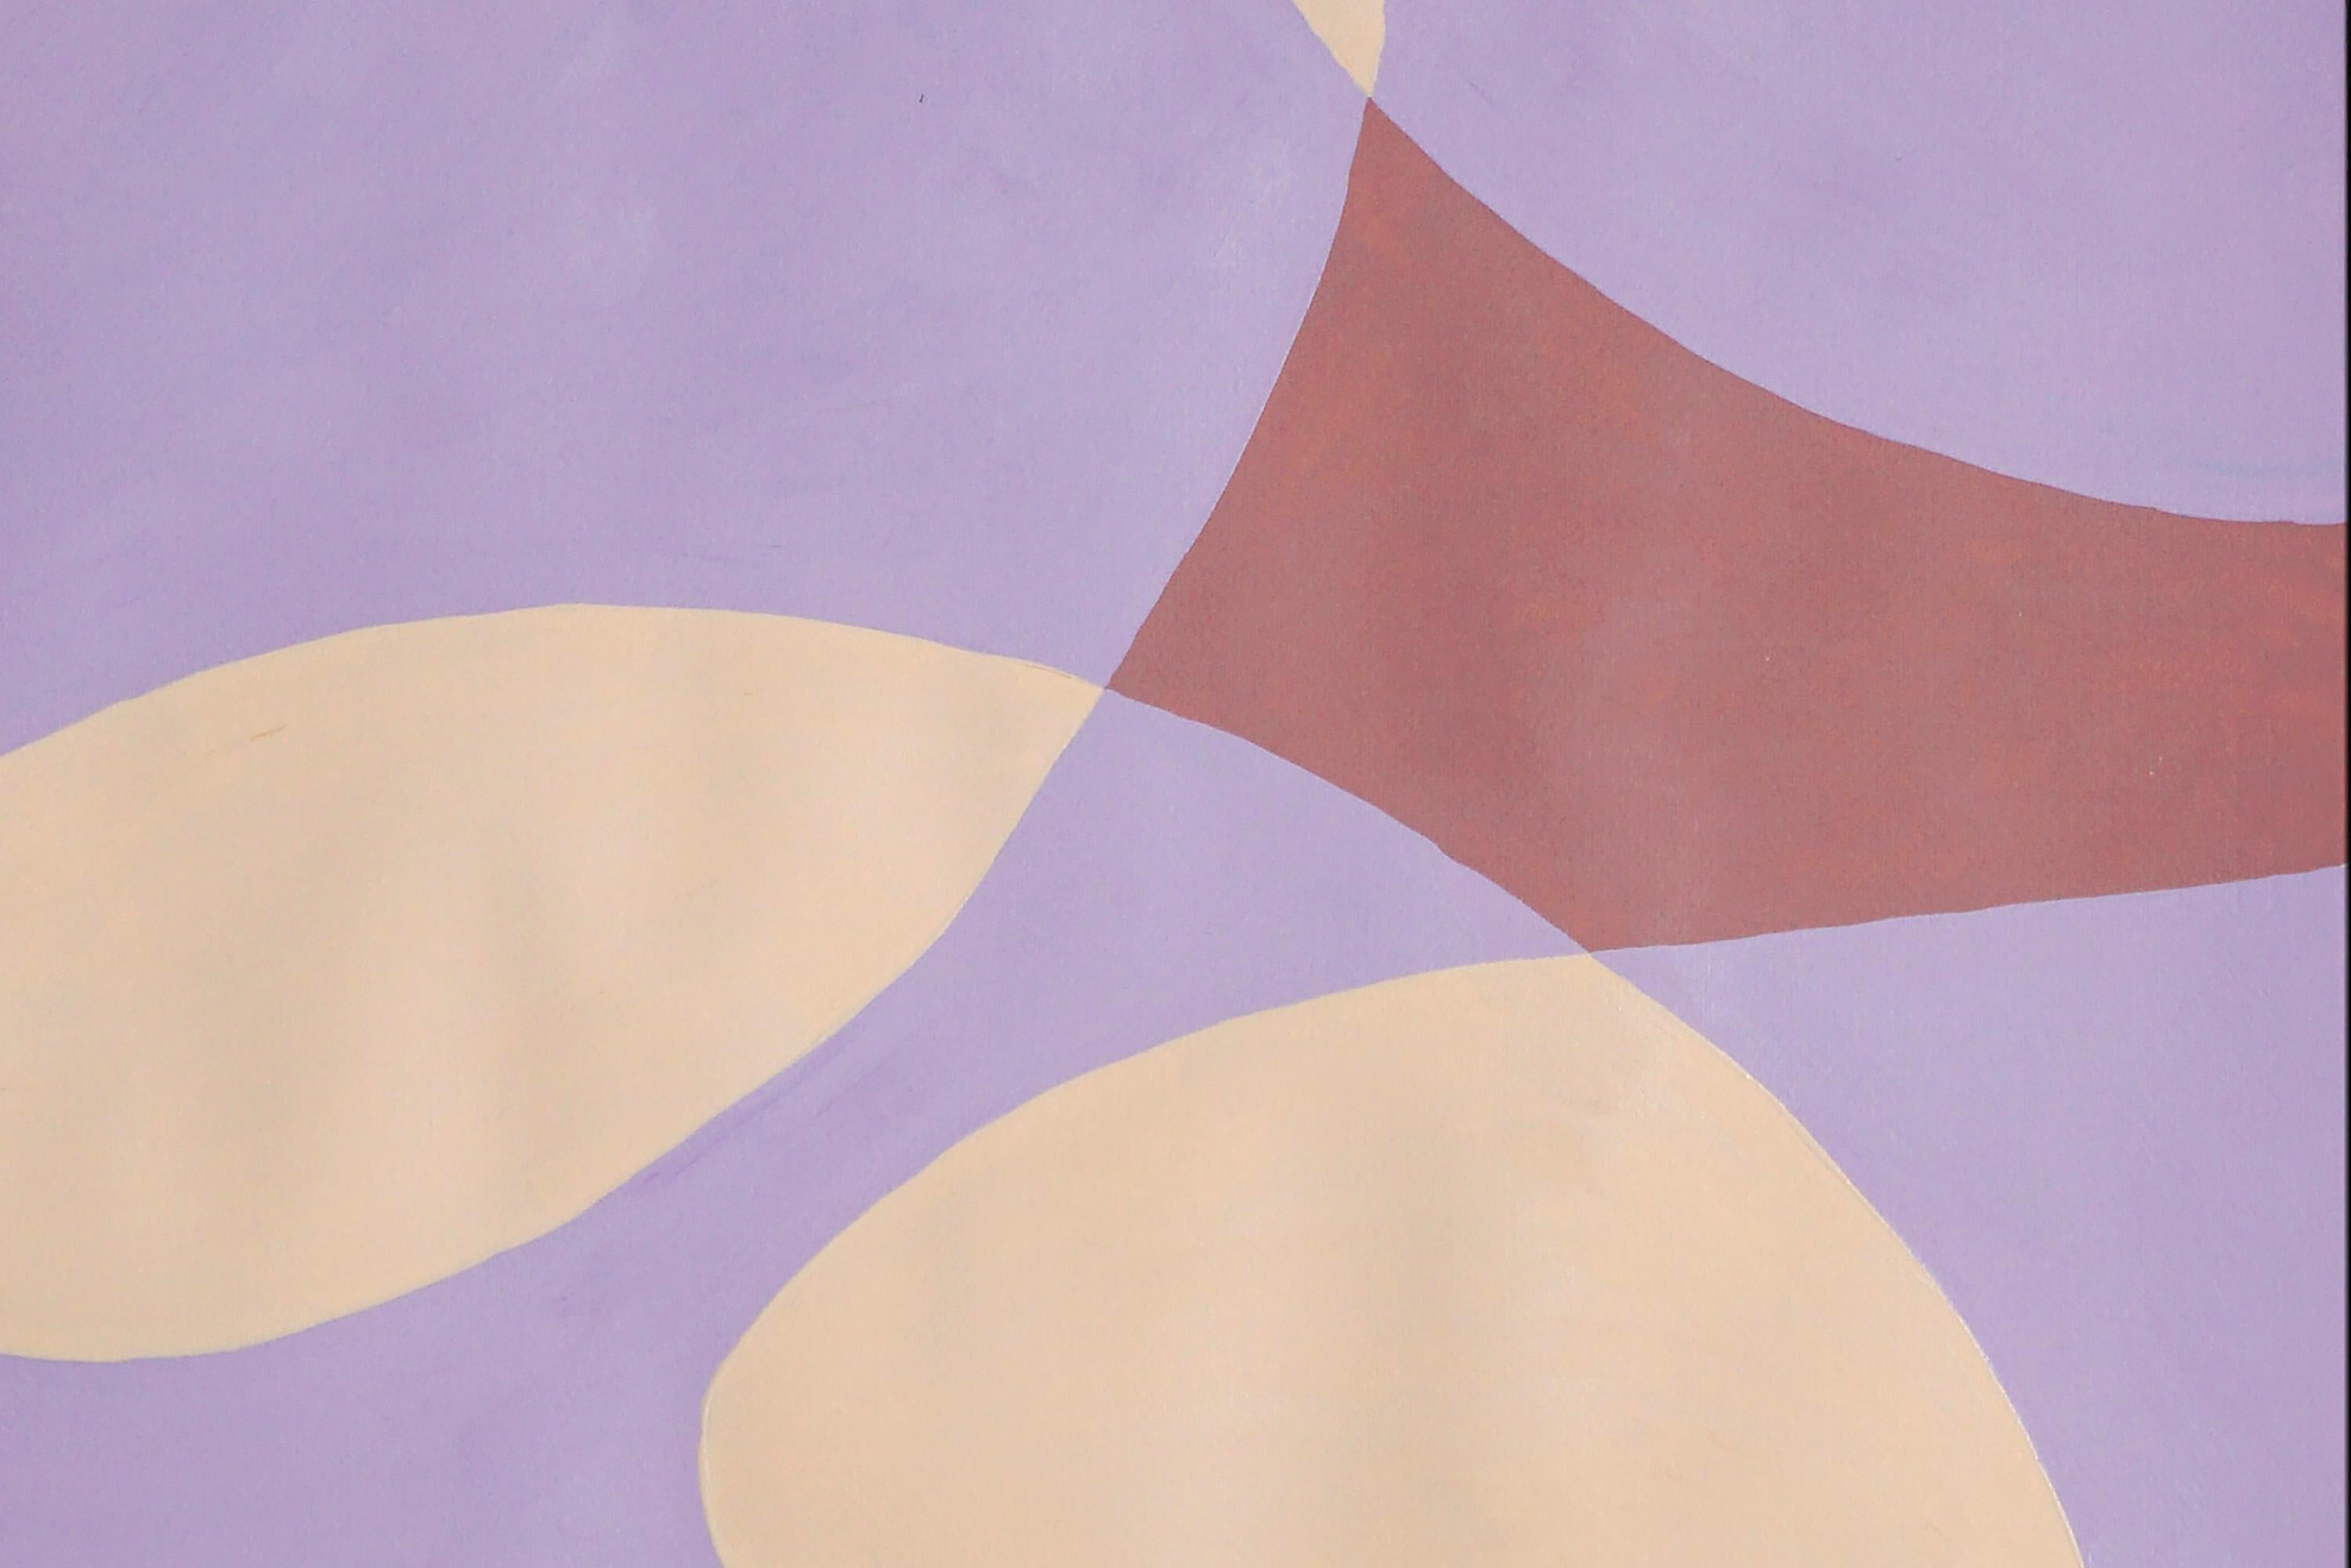 Floating Shapes in Mauve, Mid-Century Modern Abstract Diptych, Coral and Beige  3